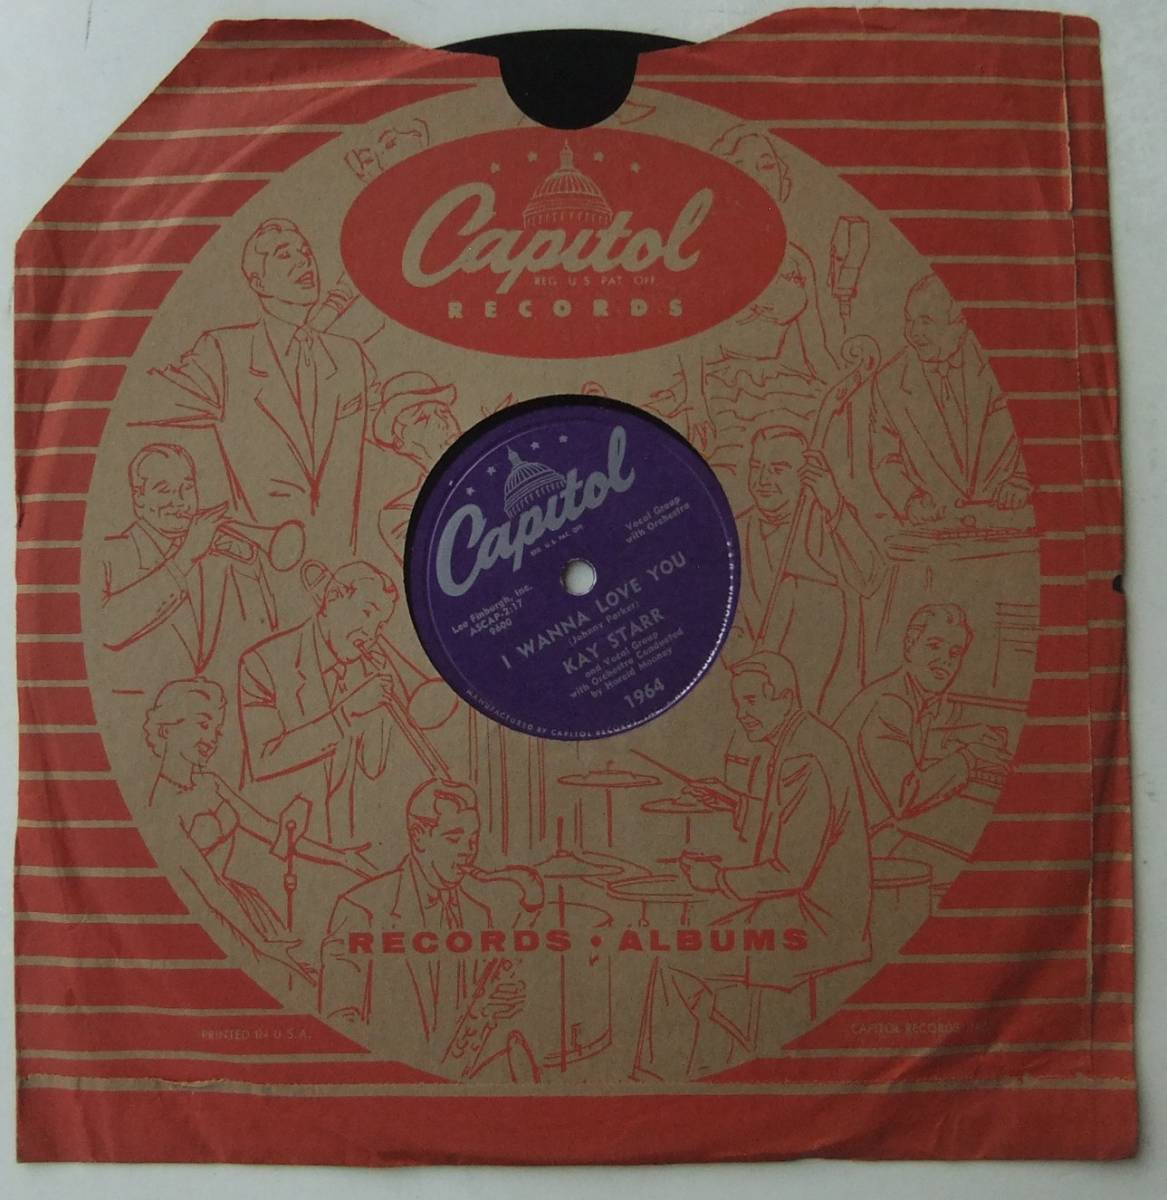 ◆ KAY STARR ◆ I Wanna Love You / Wheel Of Fortune ◆ Capitol 1964 (78rpm SP) ◆_画像1